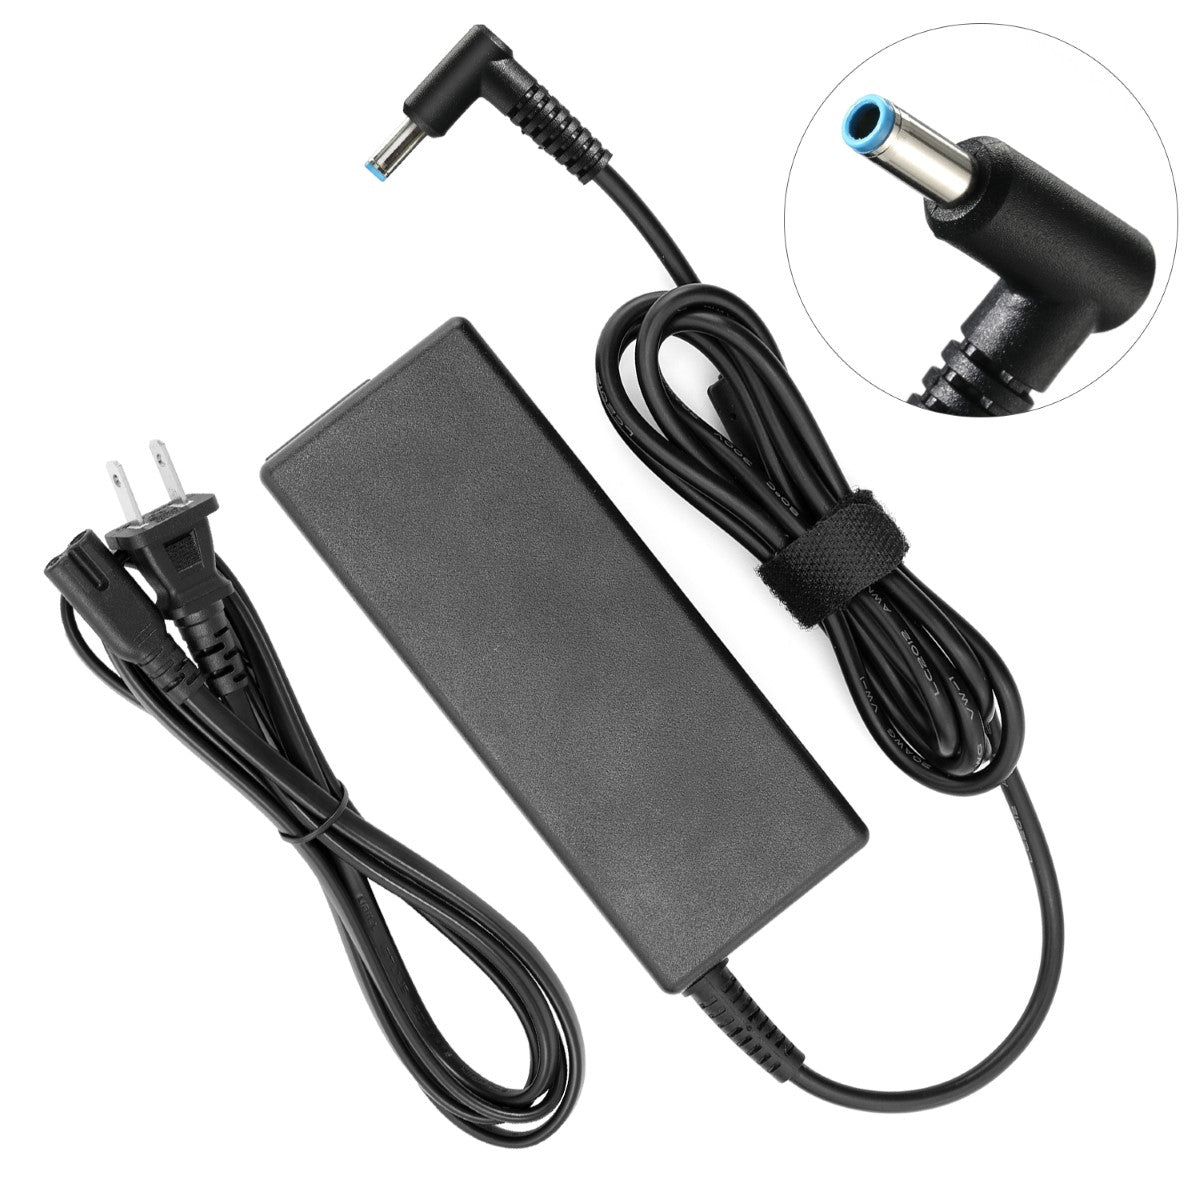 AC Adapter Charger for hp Envy Touchsmart 15-k019nr Notebook.